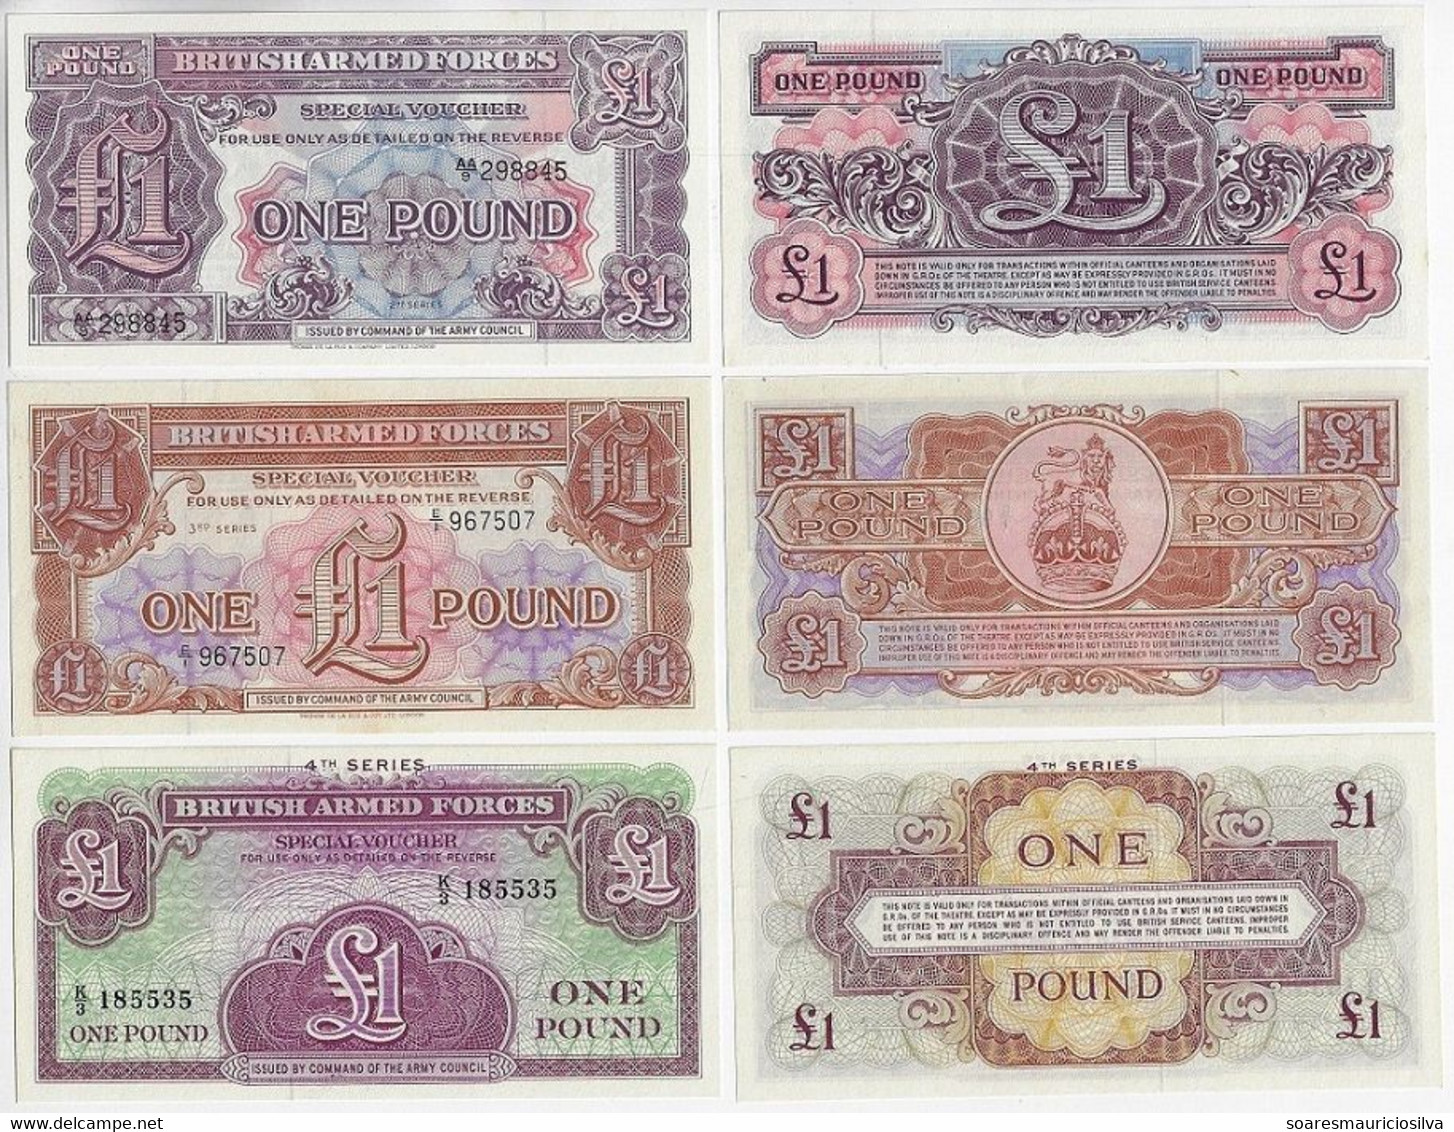 United Kingdom Great Britain 3 Banknote 1 Pound 1956 / 1962 Pick-M-22 29 And 36 Military Issue British Armed Force Unc - British Armed Forces & Special Vouchers